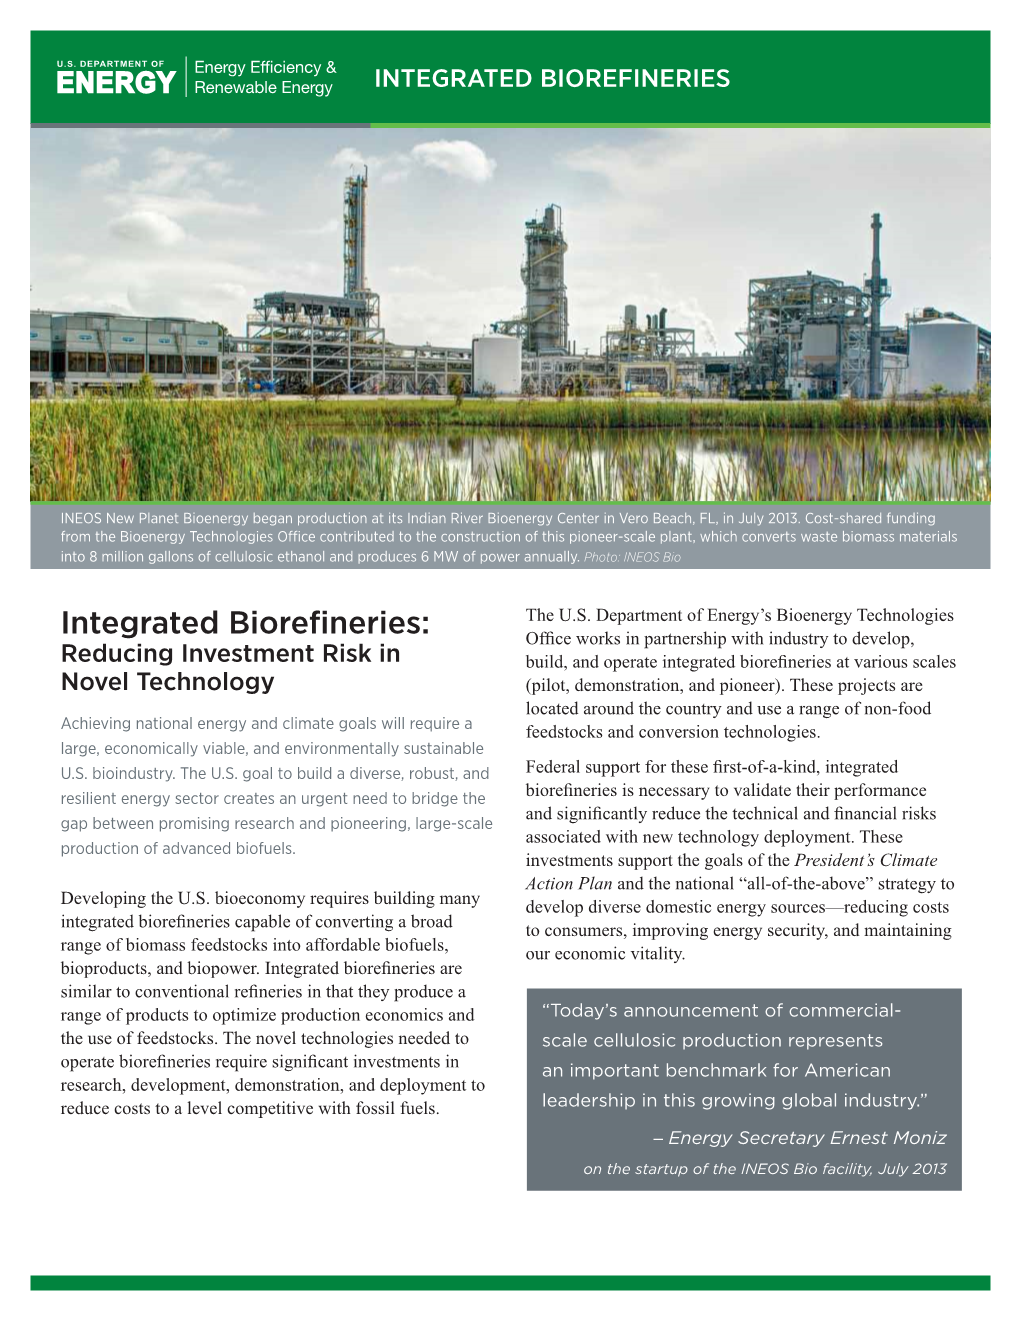 Integrated Biorefineries:Biofuels, Biopower, and Bioproducts